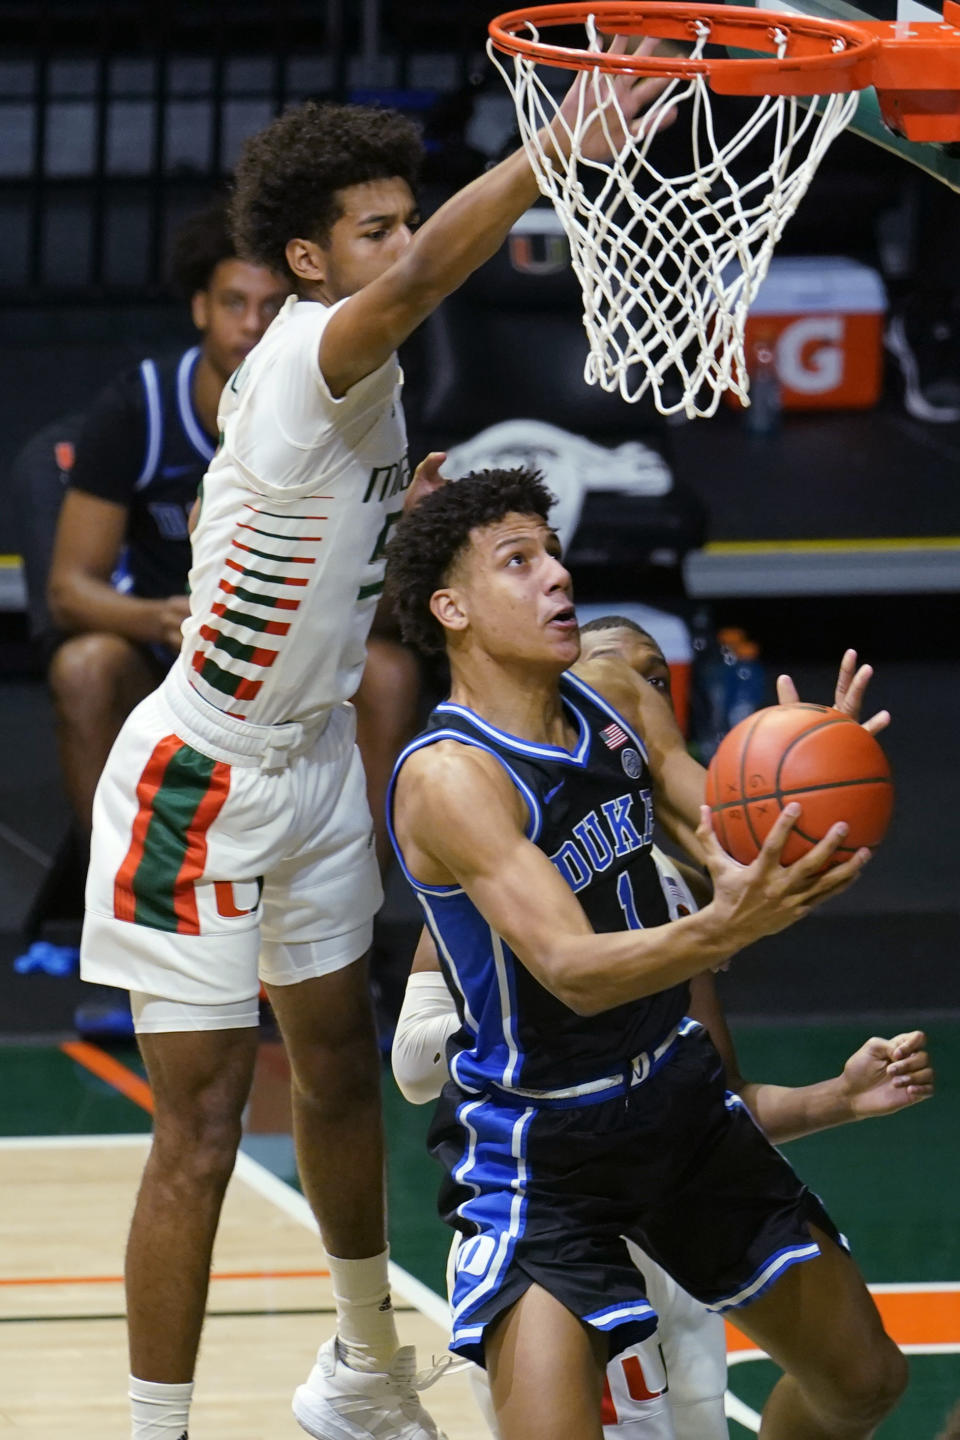 FILE - In this Feb. 1, 2021, file photo, Duke forward Jalen Johnson (1) drives to the basket as Miami guard Harlond Beverly (5) defends during an NCAA college basketball game in Coral Gables, Fla. Johnson was selected by the Atlanta Hawks in the NBA draft Thursday, July 29. (AP Photo/Marta Lavandier, File)